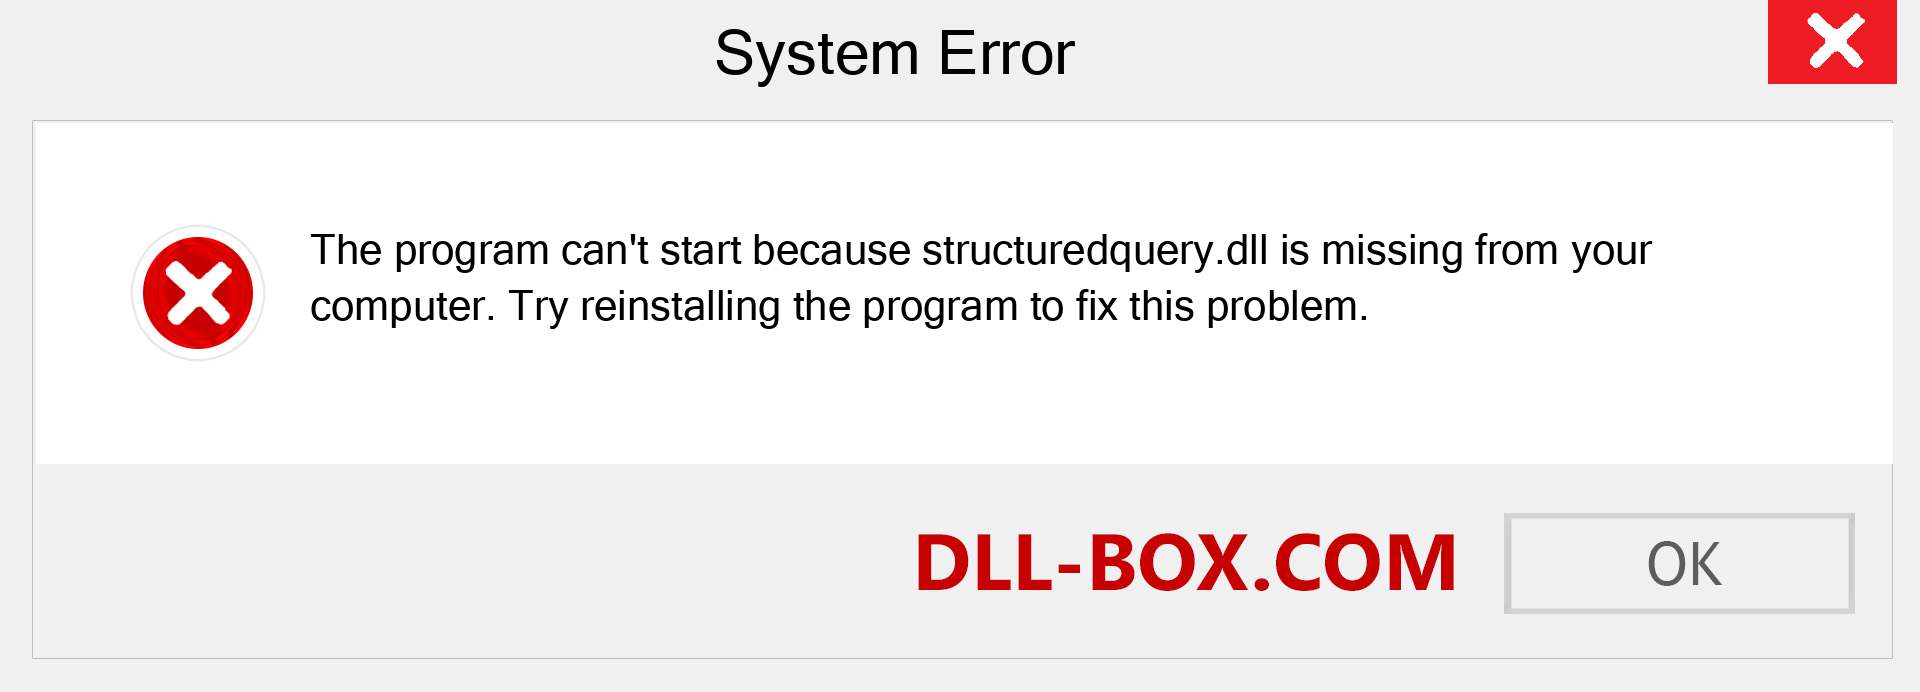  structuredquery.dll file is missing?. Download for Windows 7, 8, 10 - Fix  structuredquery dll Missing Error on Windows, photos, images